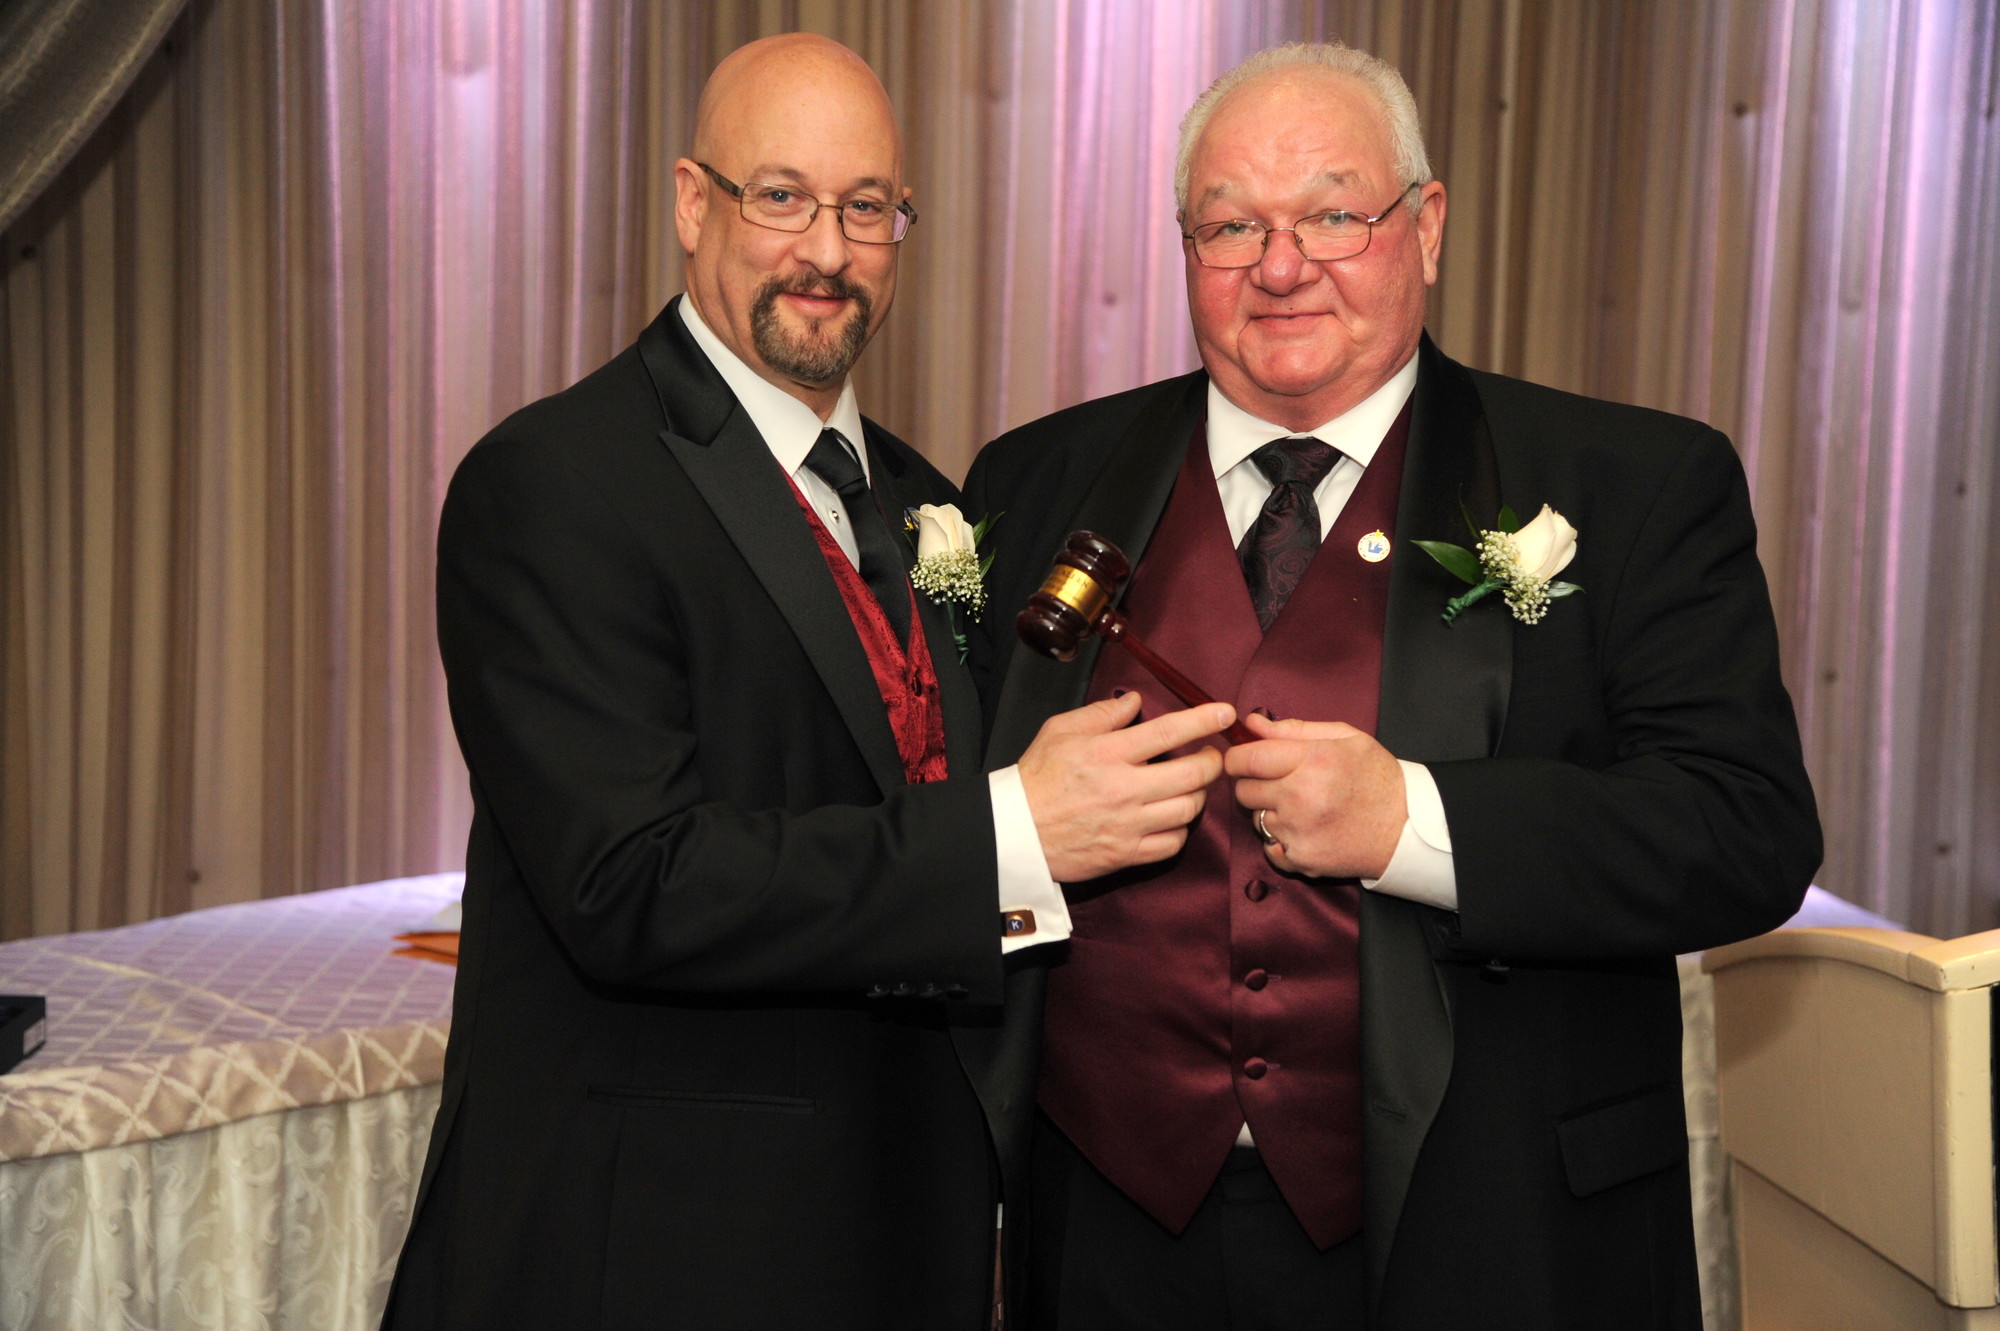 Mitchell Allen, left, was installed as president of the East Meadow Chamber of Commerce last Friday at the organization’s 60th installation dinner, succeeding Stephen Haller.